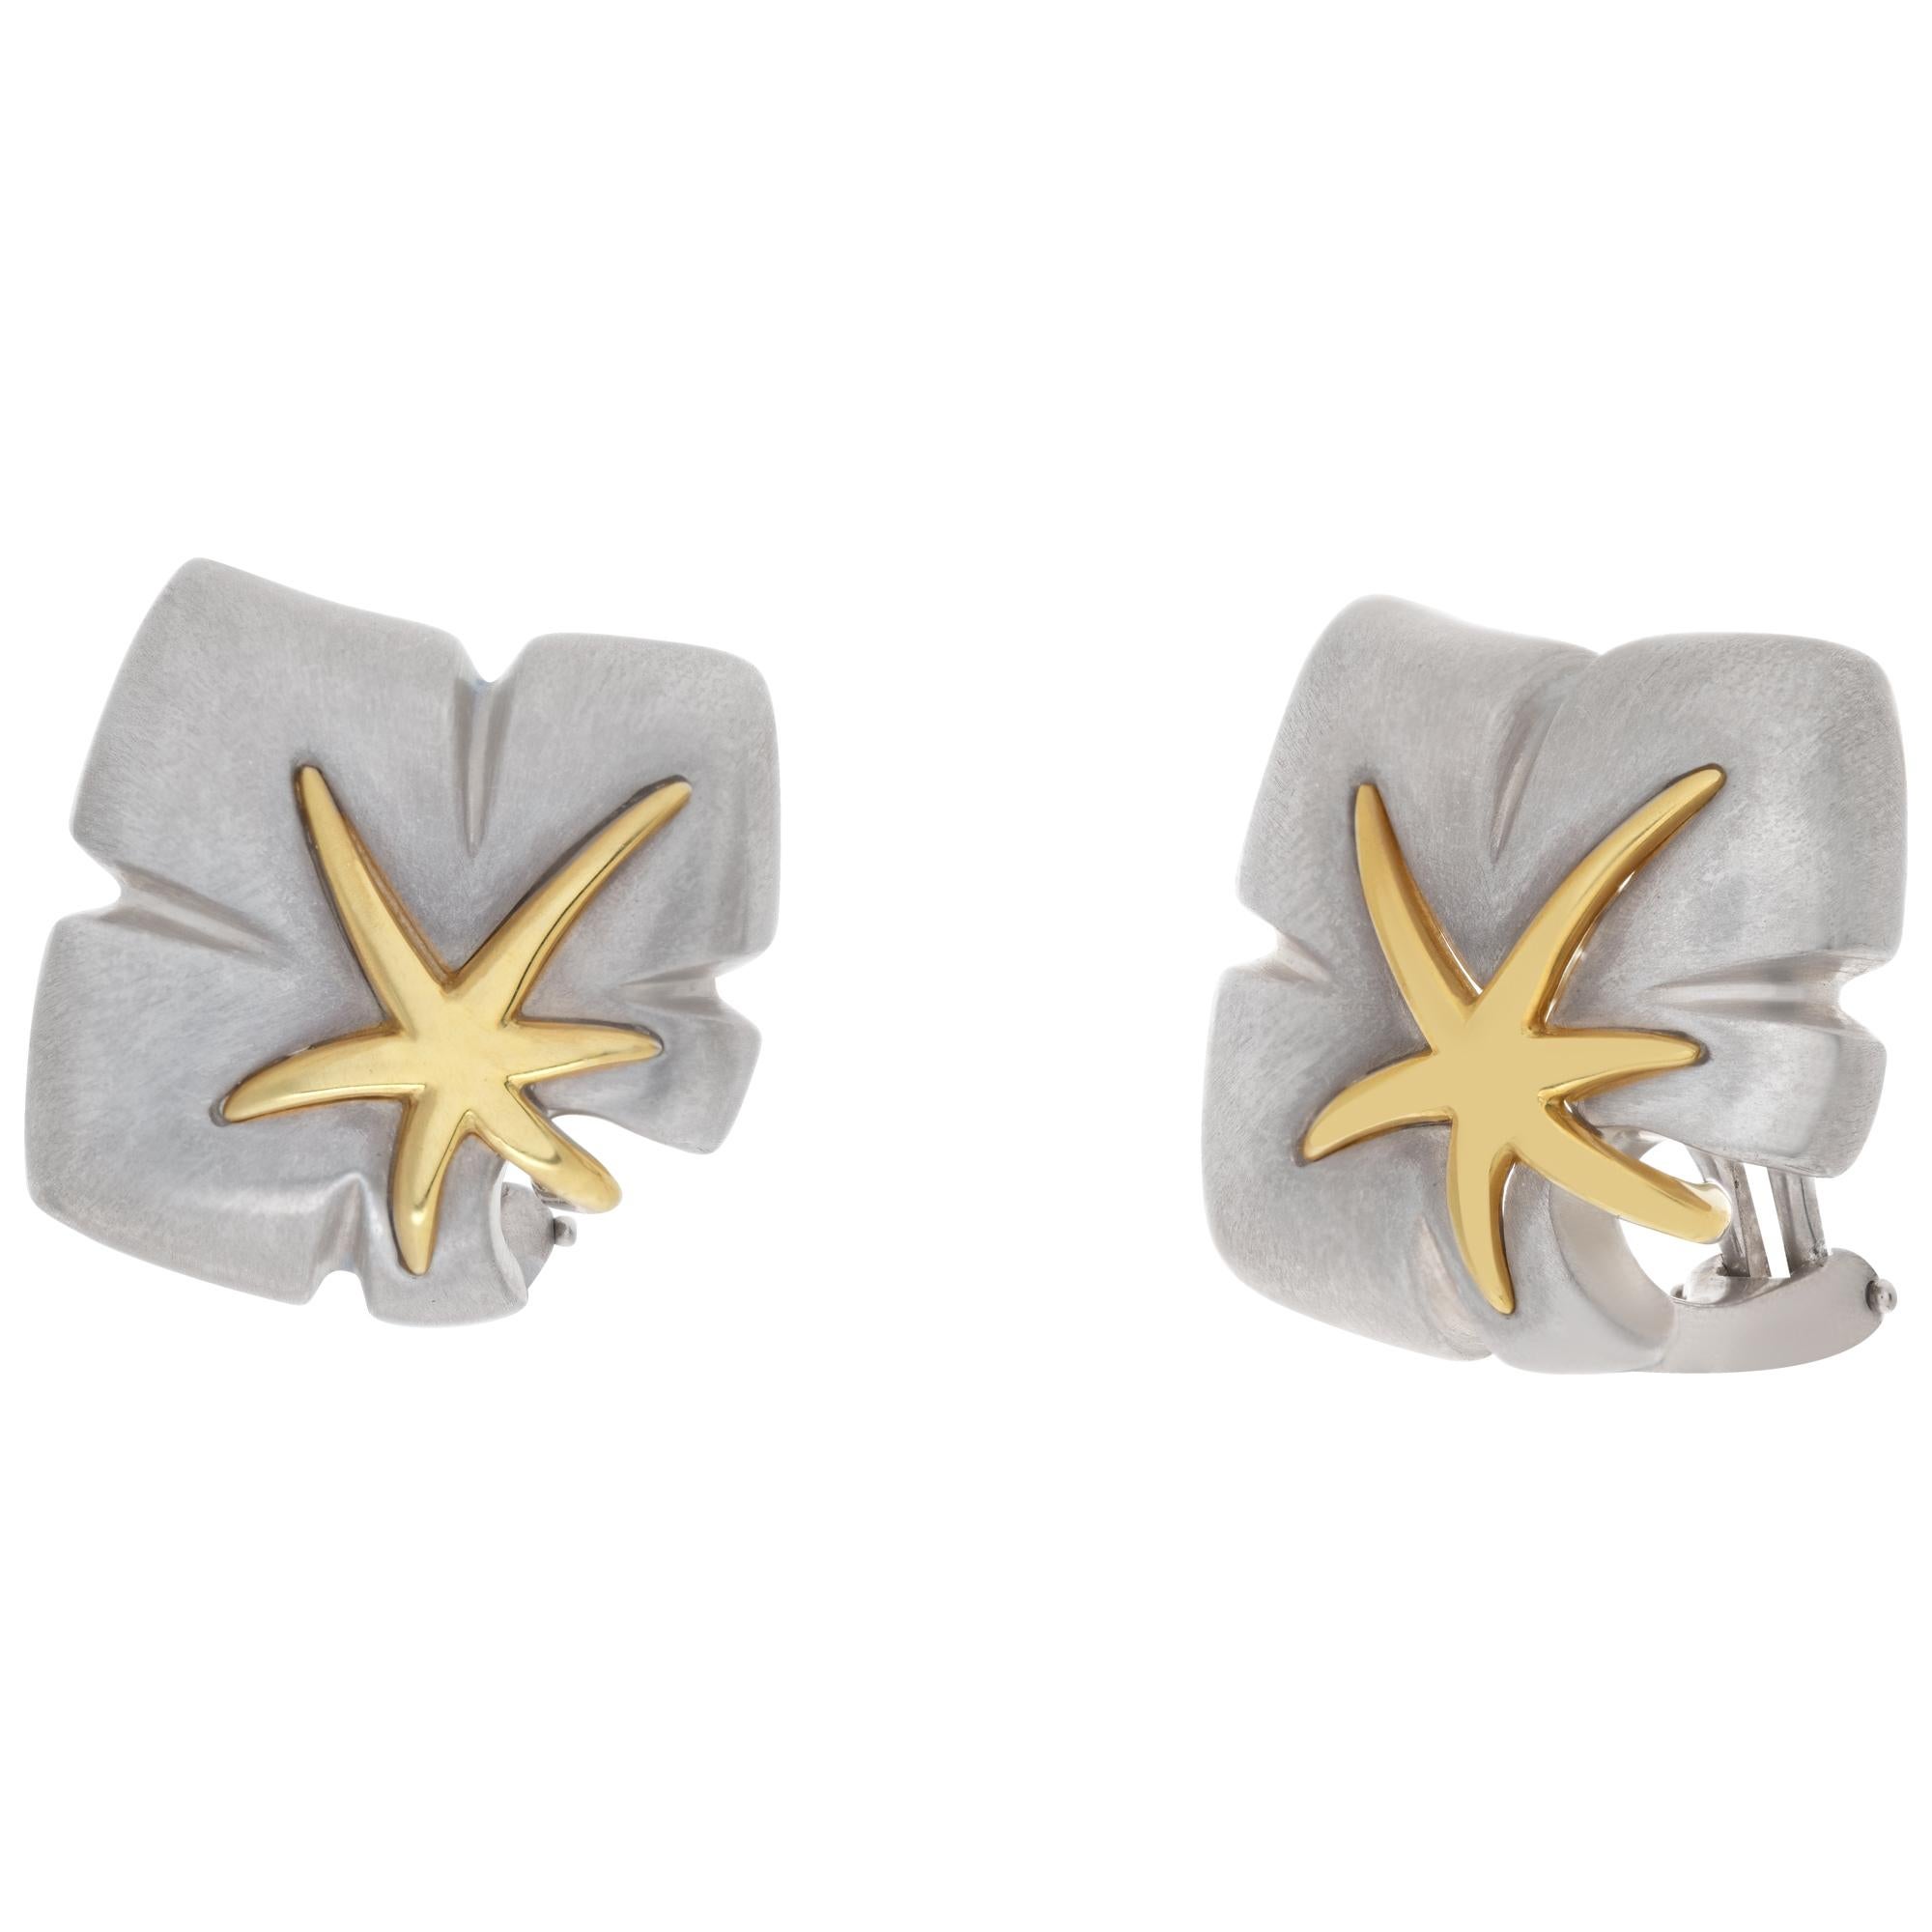 Tiffany & Co. Silver Maple Leaf earrings with 18k yellow gold accents 22mm x 26mm
